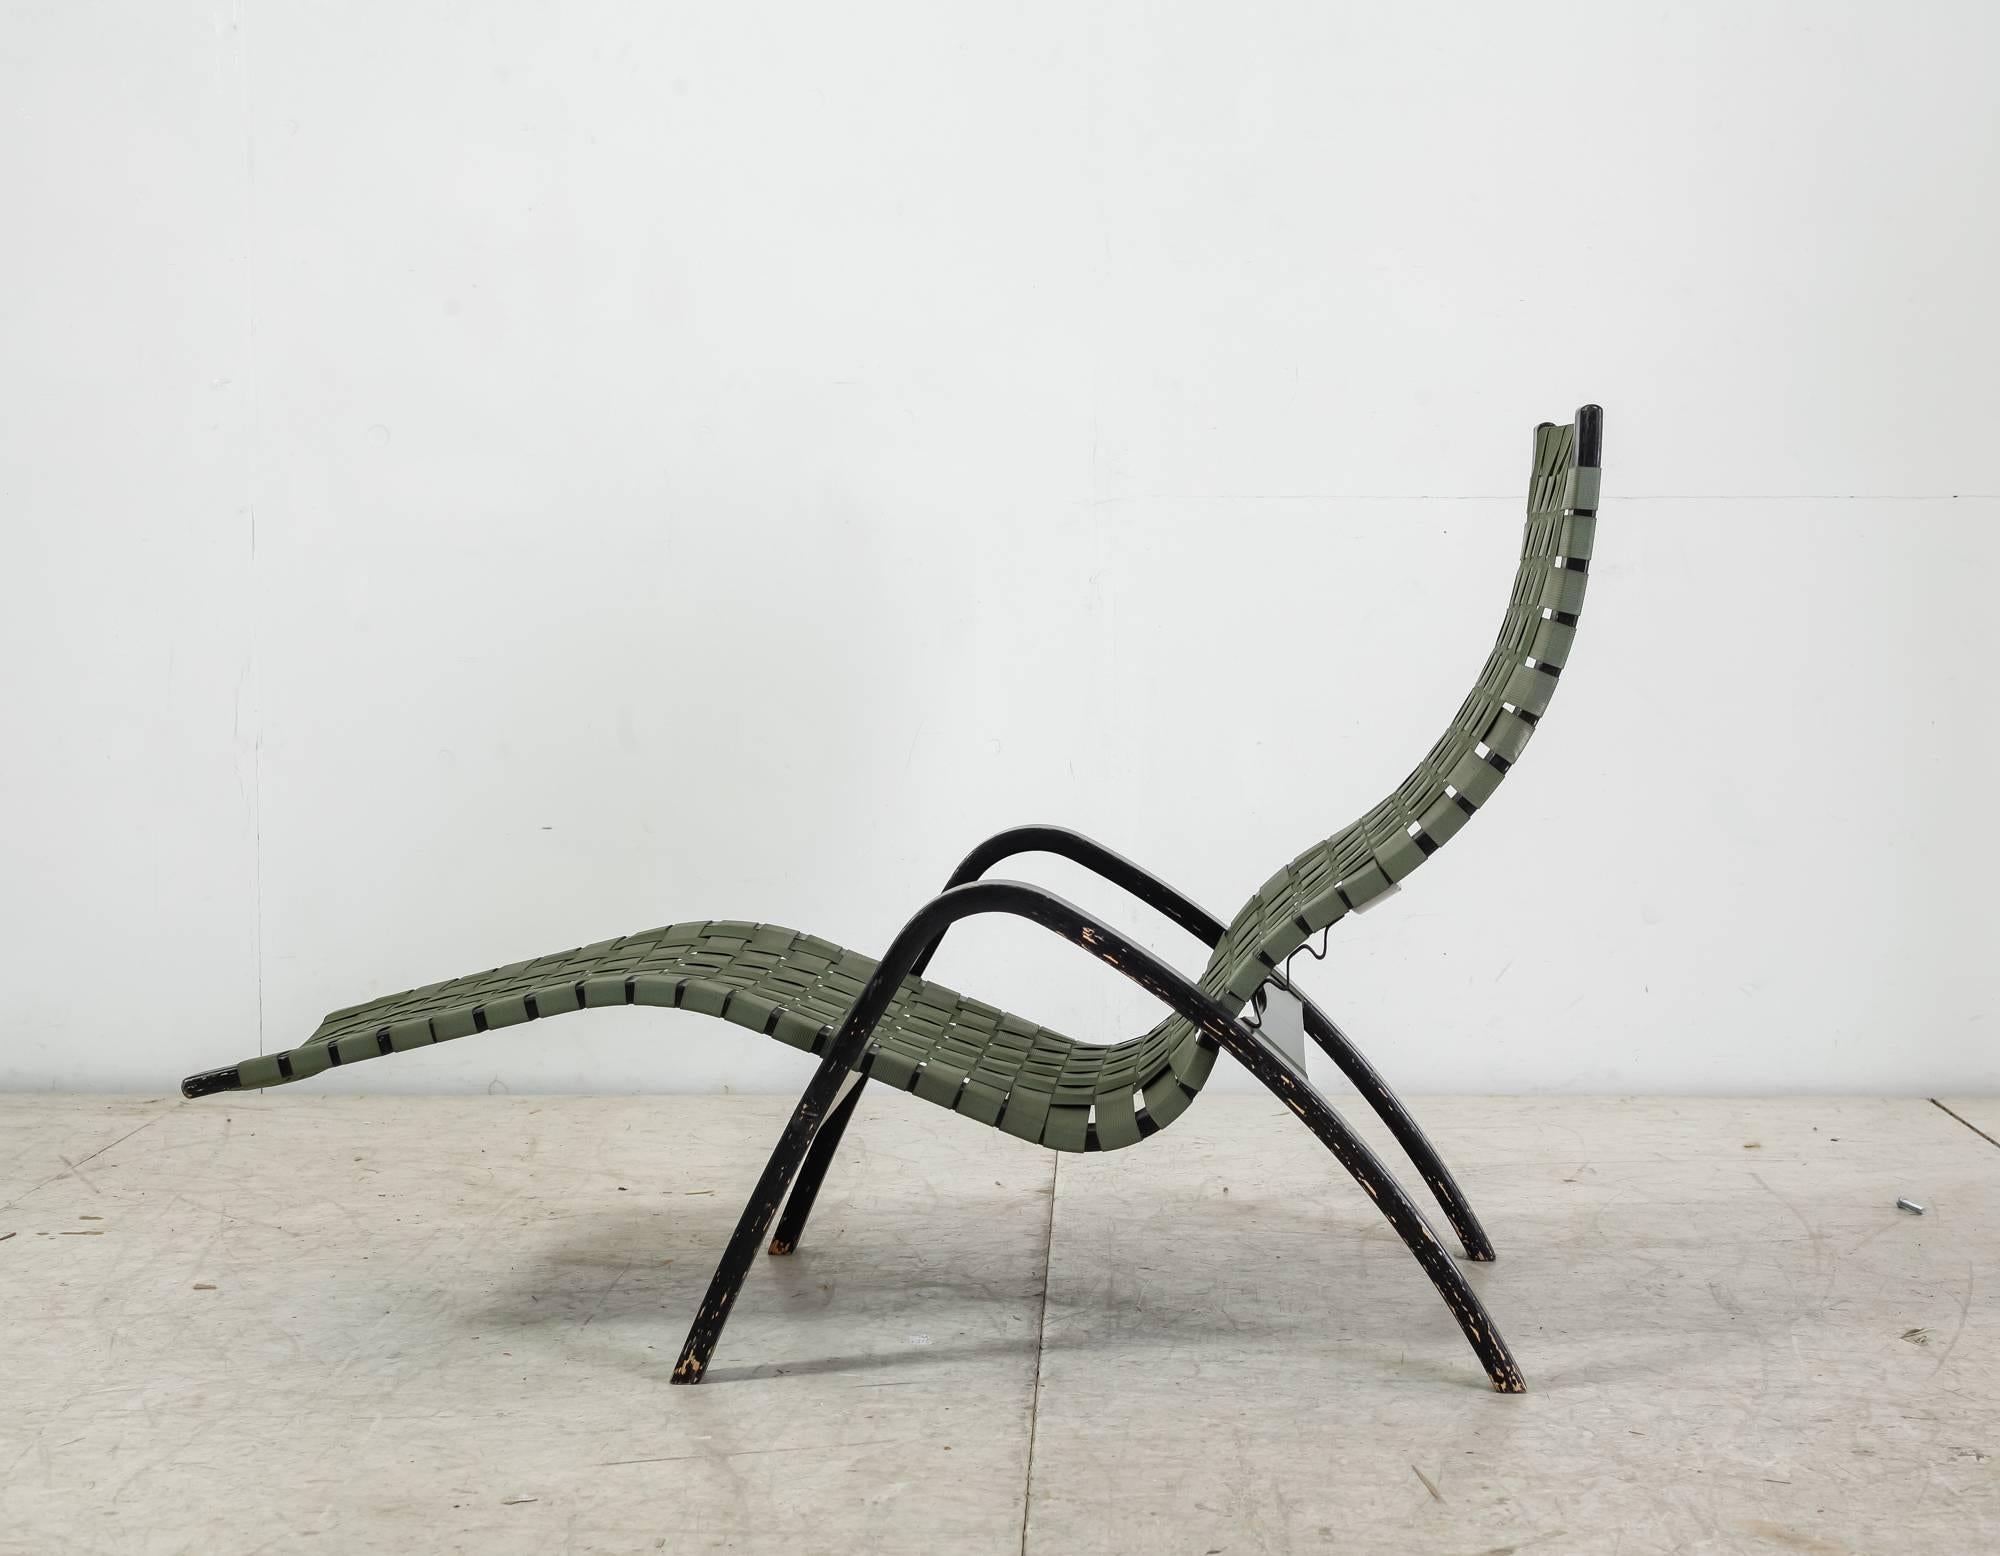 A Clifford Pascoe chaise longue, made of a black lacquered bent maple frame, with a green canvas webbing. The loose seating can easily be placed in three different positions.

There are some damages to the paint, but the chair is in an overall